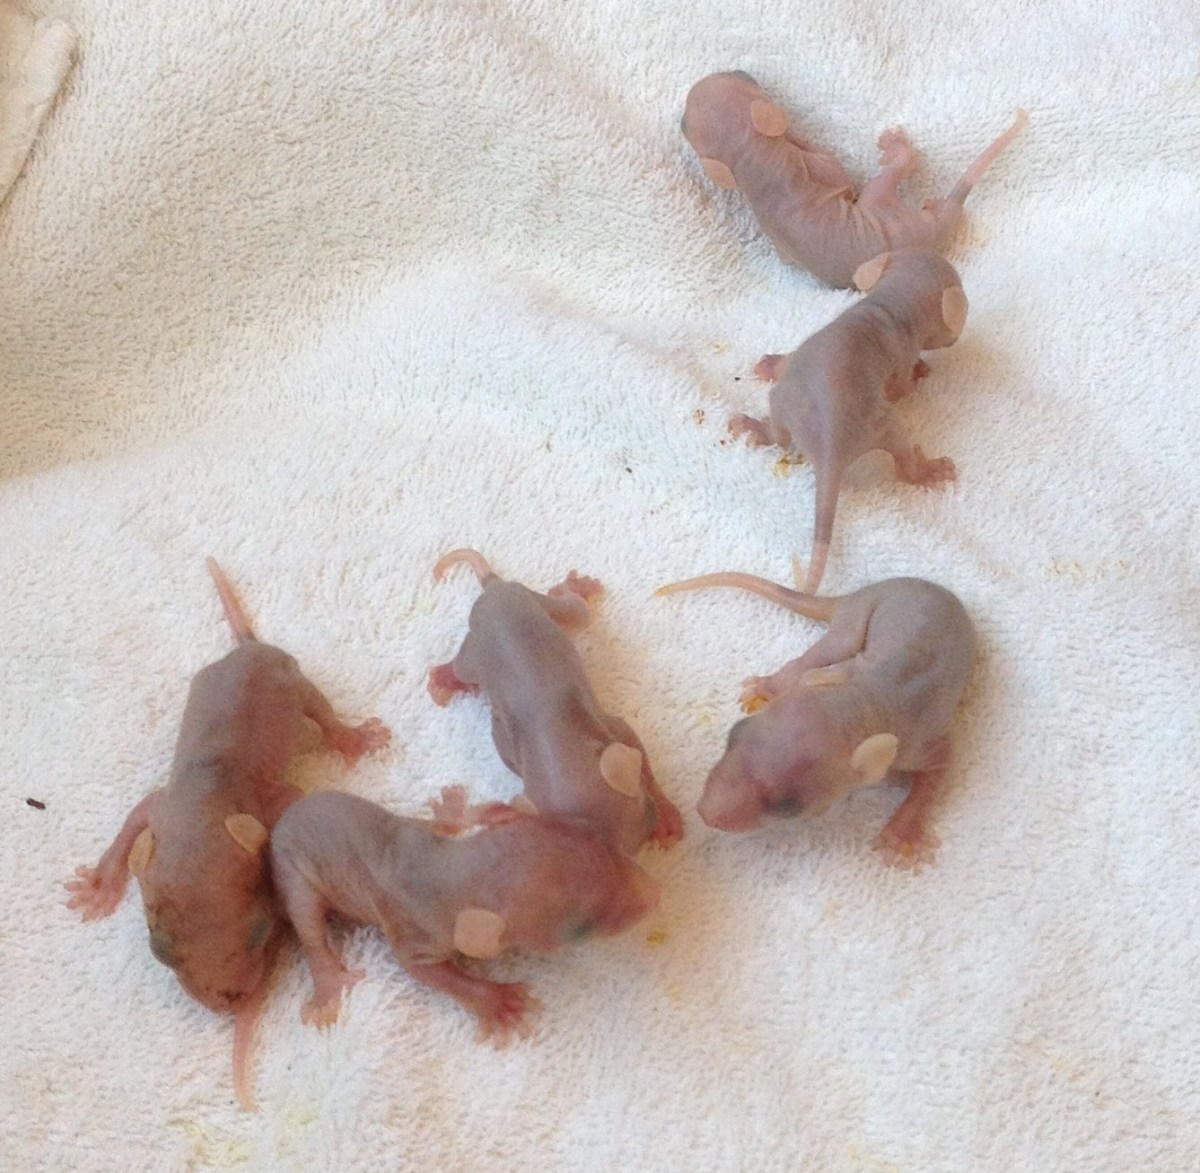 These baby possums are smaller than your fist